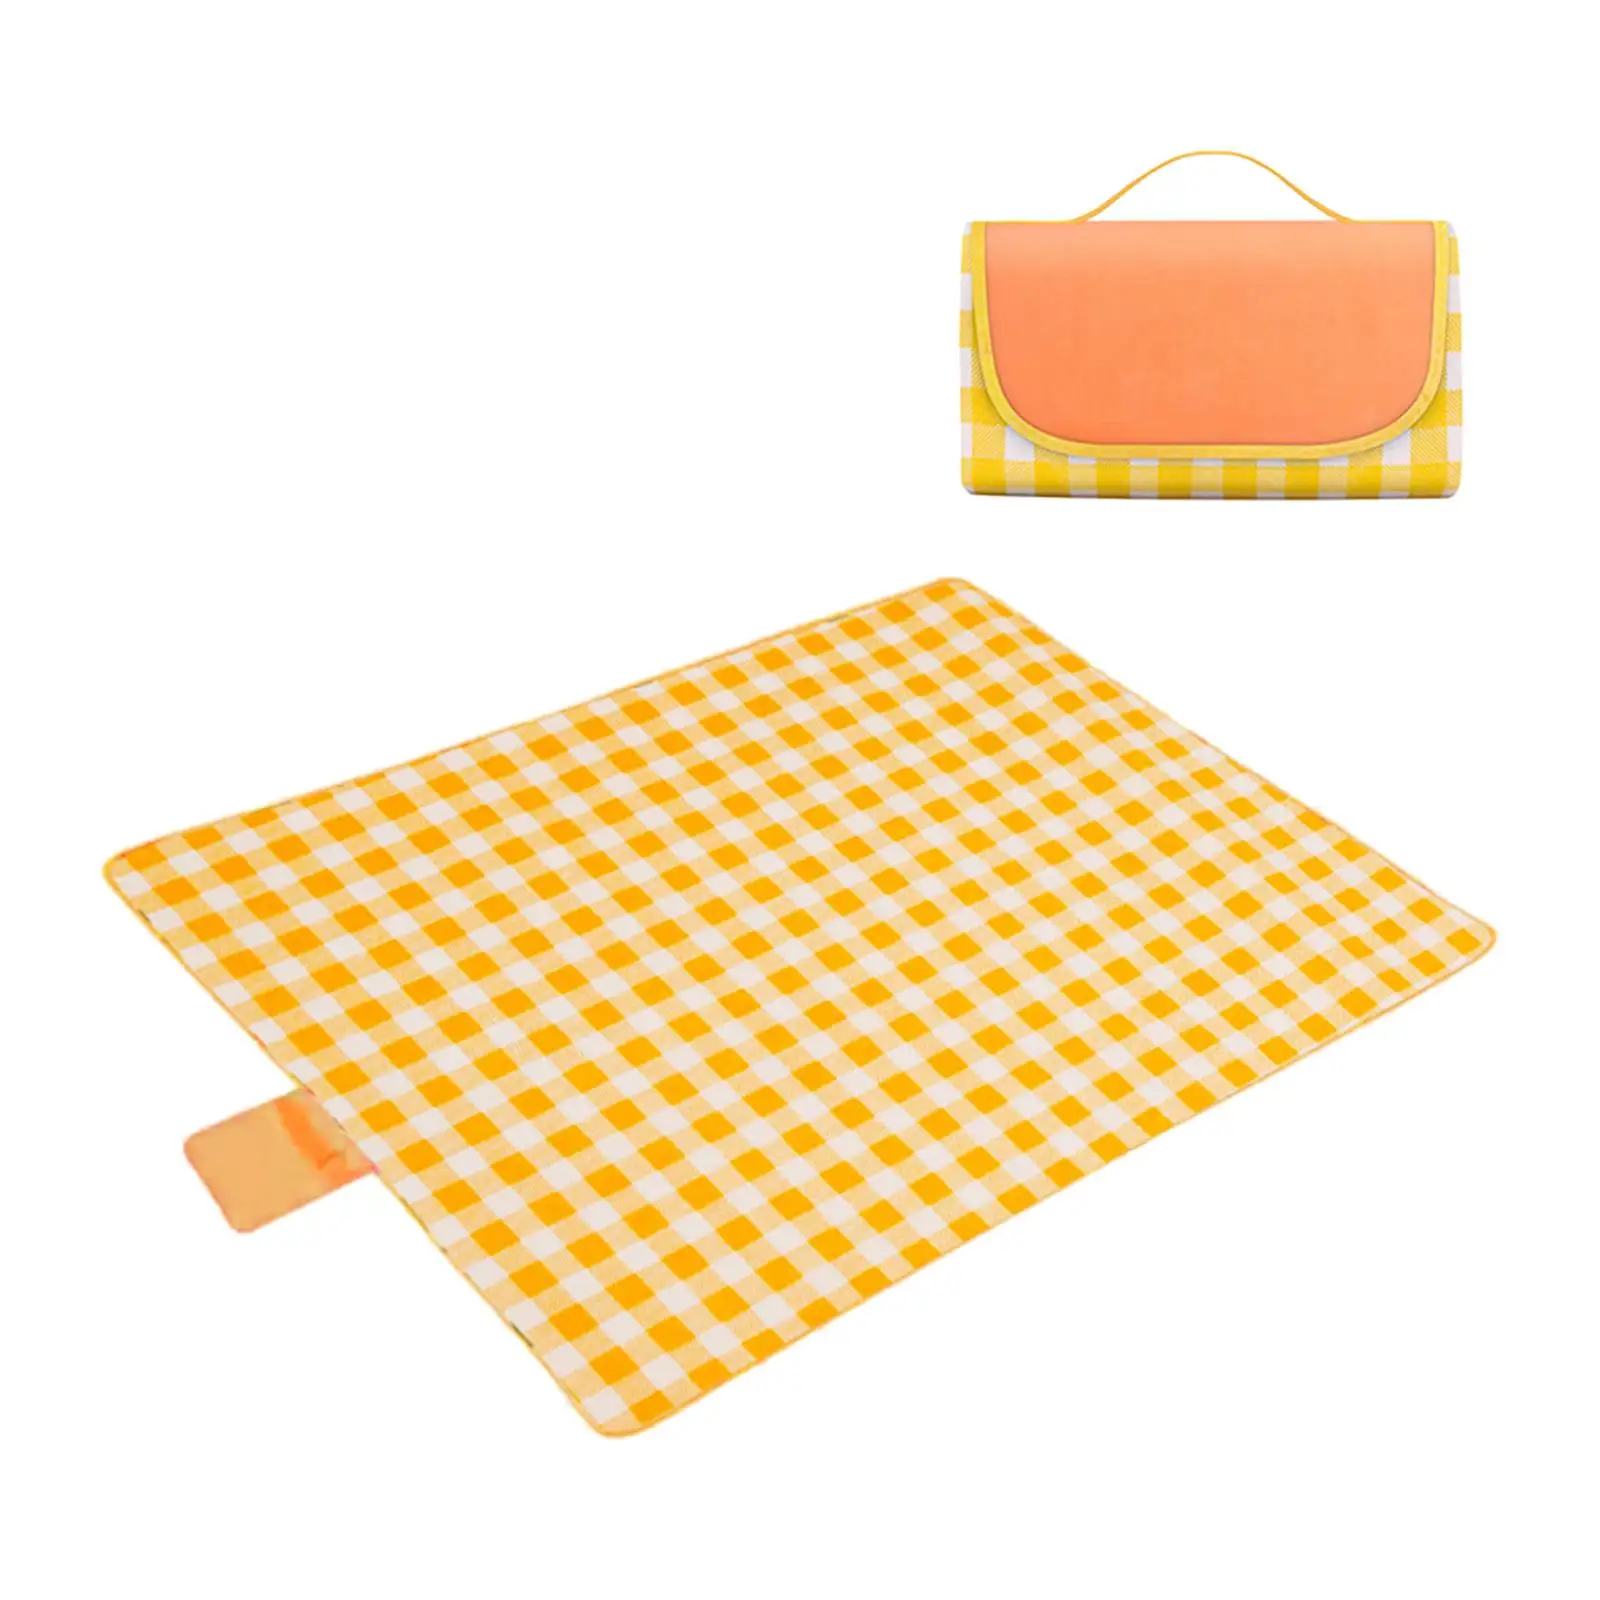 Large Picnic Outdoor Blanket with Portable Handle for travel Camping